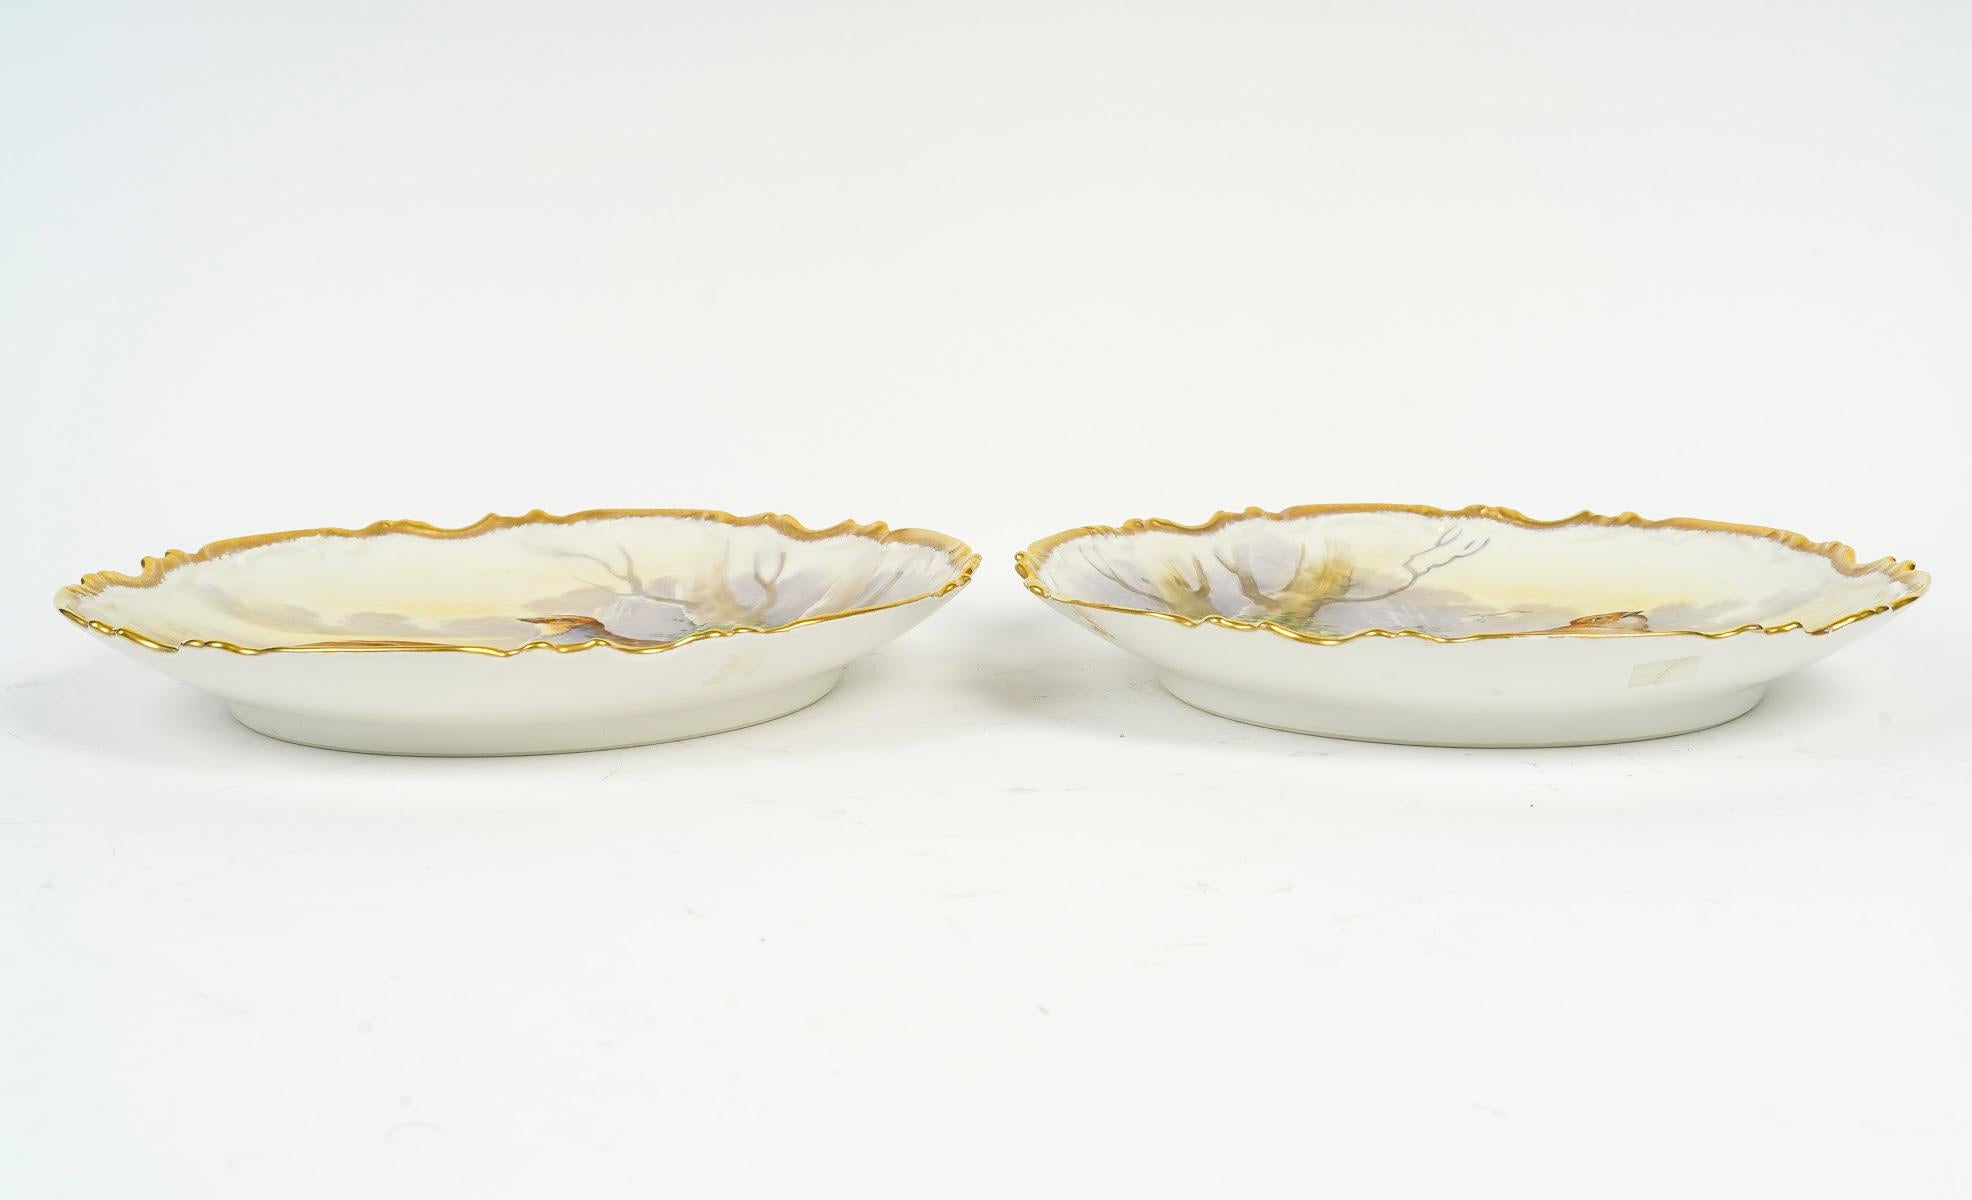 Pair of Decorative Dishes, Manufacture of Porcelain of Limoges. For Sale 1